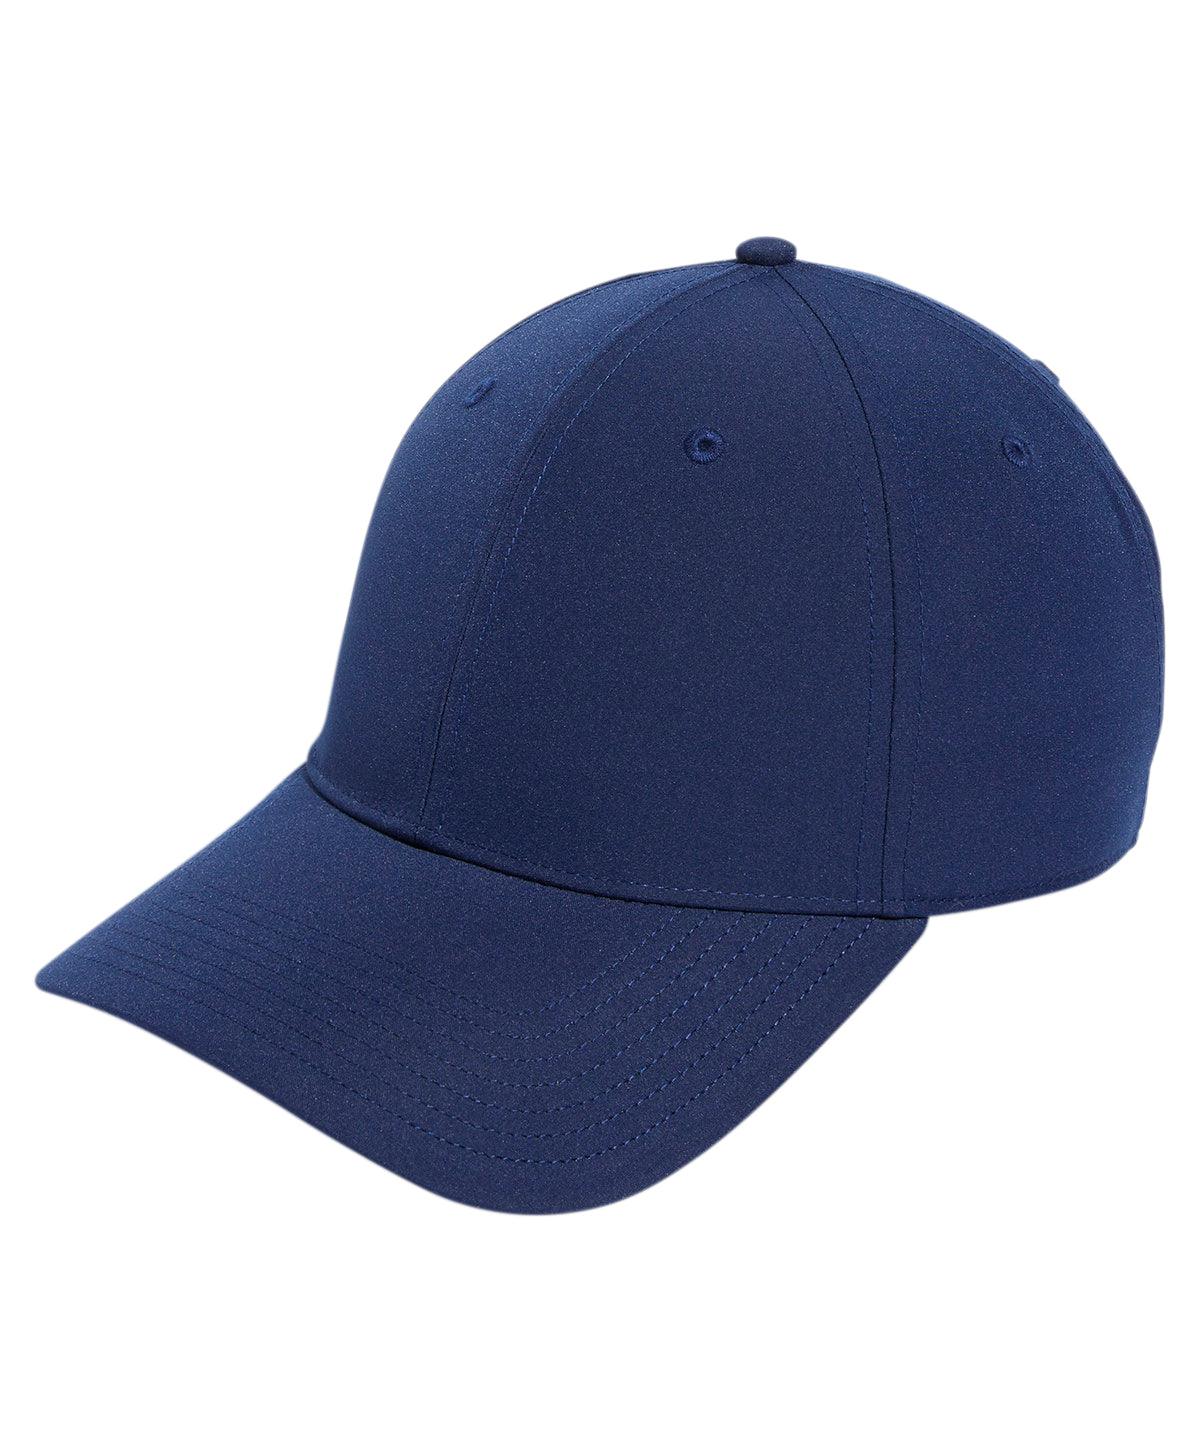 Navy - adidas® golf performance crestable cap Caps adidas® Exclusives, Golf, Headwear, New in, New Styles For 2022, Premium Sports Schoolwear Centres